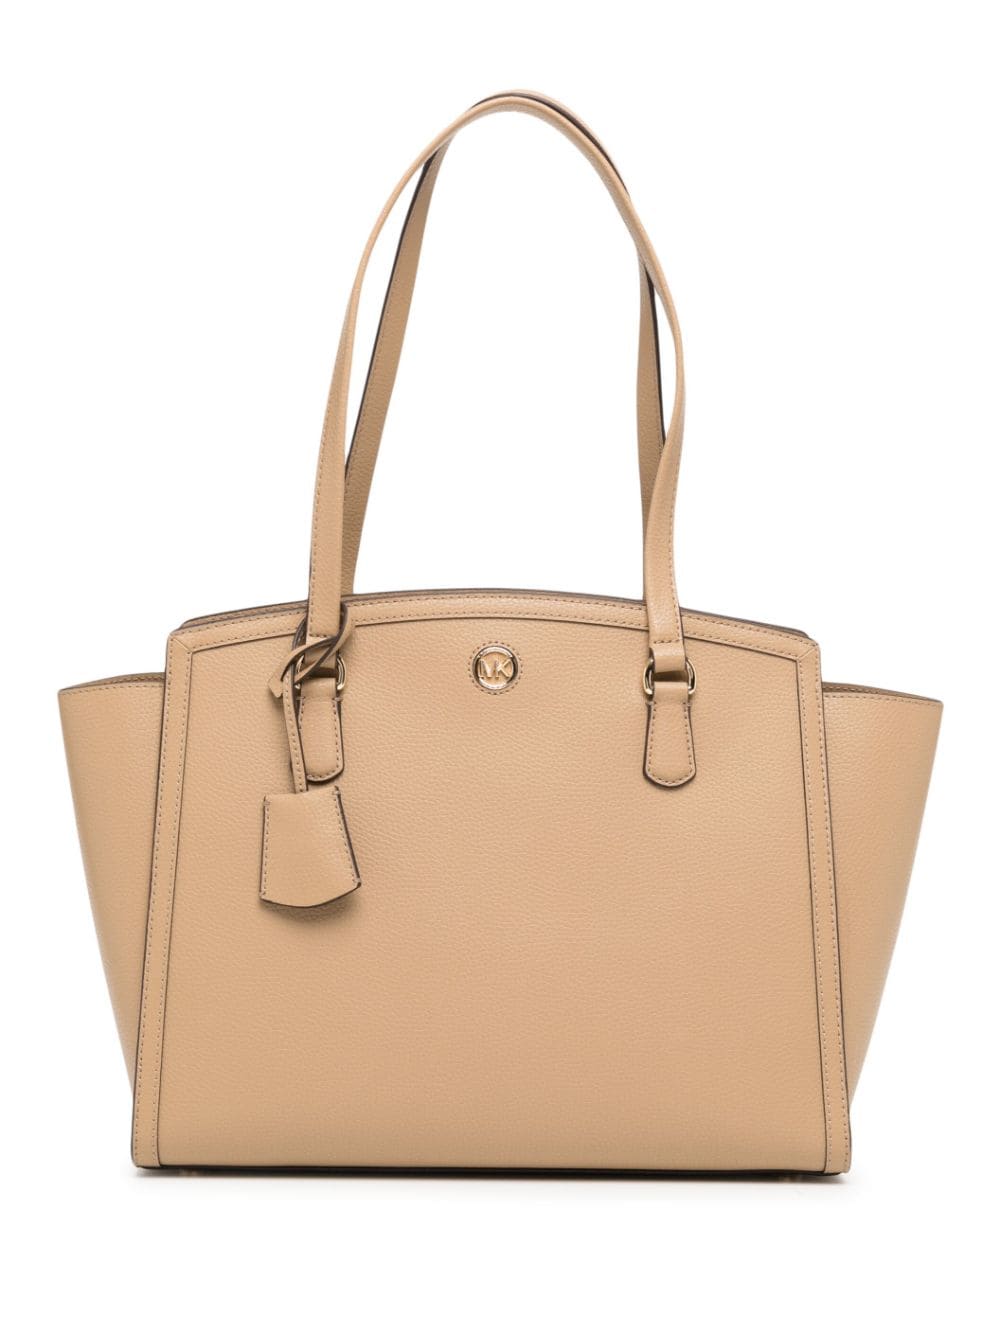 Michael Kors Chantal Leather Tote Bag In Camel